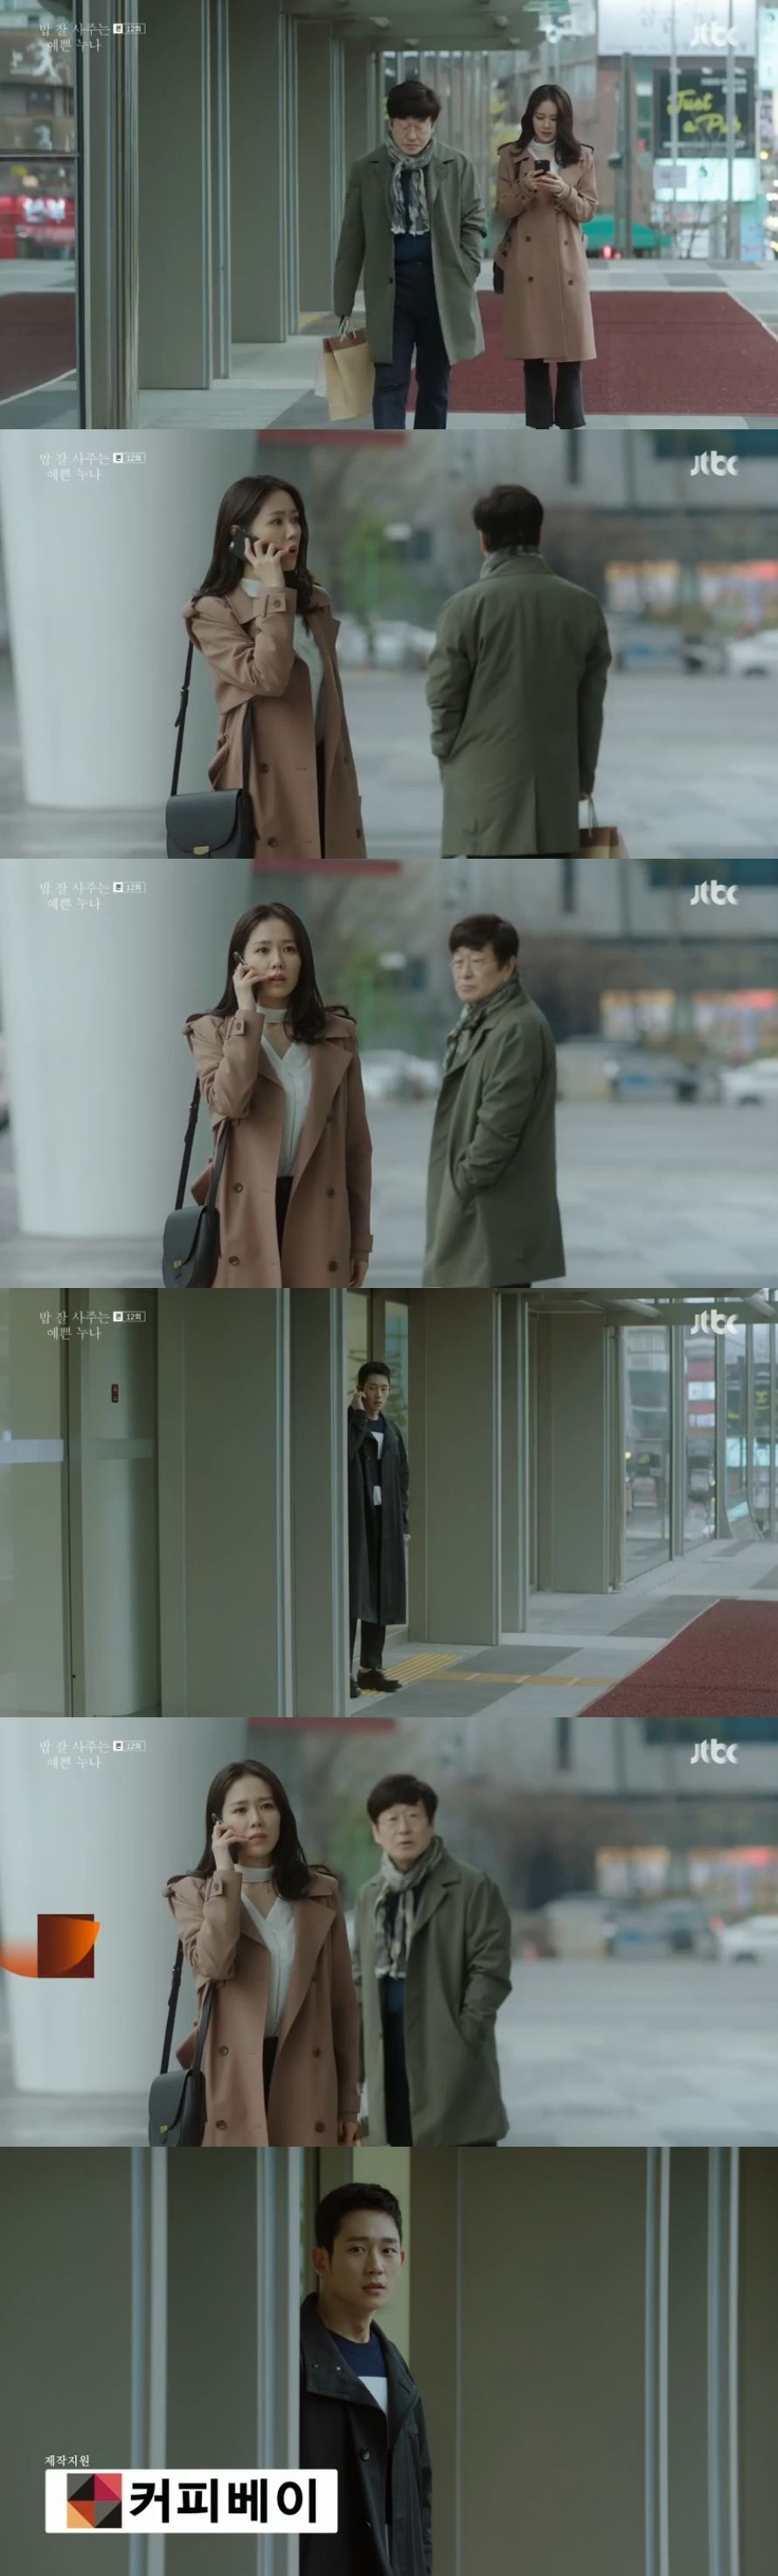 Seoul = = Jung Hae In witnessed the meeting between Son Ye-jin and his father Kim Chang-wan and was greatly angry. JTBCs Bob Good Sister, which was broadcast at 11 pm on the 5th, included Yun Jin-ah (Son Ye-jin) and Seo Jun-hee (Jung Hae In) who continued to love even in difficult times.On this day, Jin-ah encountered a primary election (played by Jang So-yeon) in a confrontation that she forced out because of her mother.Primary selection told Jin-ah, who is facing the confrontation, Get away from our Jun-hee, I can not see my brother being ignored.Jin-ah, who had been confronted in a complicated state of mind since then, could not concentrate on the confrontation.The primary election next to him and his father, Kim Chang-wan, were concerned.I tried to go out against him, but today is the worst. Jinah bowed his head to the opponent and apologized, and eventually shed tears and ruined the confrontation.Since then, Primary Election has informed Junhee that Jin-ah has seen a confrontation.So Junhee tried to worry about Jin-ah, and the primary election to dry it even had an argument with Jun-hee.Primary selection said, If you ignore you in that house, you can see this confrontation. This is just done.I can see what I said to you in the house while I did not know. Junhee said, I do not want my sister to know everything between us.I will hide more in the future. When the Primary Election was angry, I was tearful, Then I can not do anything to my sister. The two hugged each other silently in their situation in the extreme situation. Jina, who felt sorry, sat in front of Junhees house for a long time and waited.Junhee, who opened the door inadvertently, was angry when he found Jin-ah, but he was angry when he saw Jin-ah, who was buried in his nose, saying, My feet are sore.Junhee and Jina had a misunderstanding about the confrontation and soon the coarseness melted down. Junhee said, Do not make another accident. I will do my own.I will love my sister and be pretty at will. After Time, Jina decided to meet with Junhees father Kim Chang-wan, who is staying in Korea.Jina told Kim Chang-wan, I will tell you about the Primary Election and Junhee news. Kim Chang-wan and Jina went to dinner without Junhee, and Junhee witnessed it.